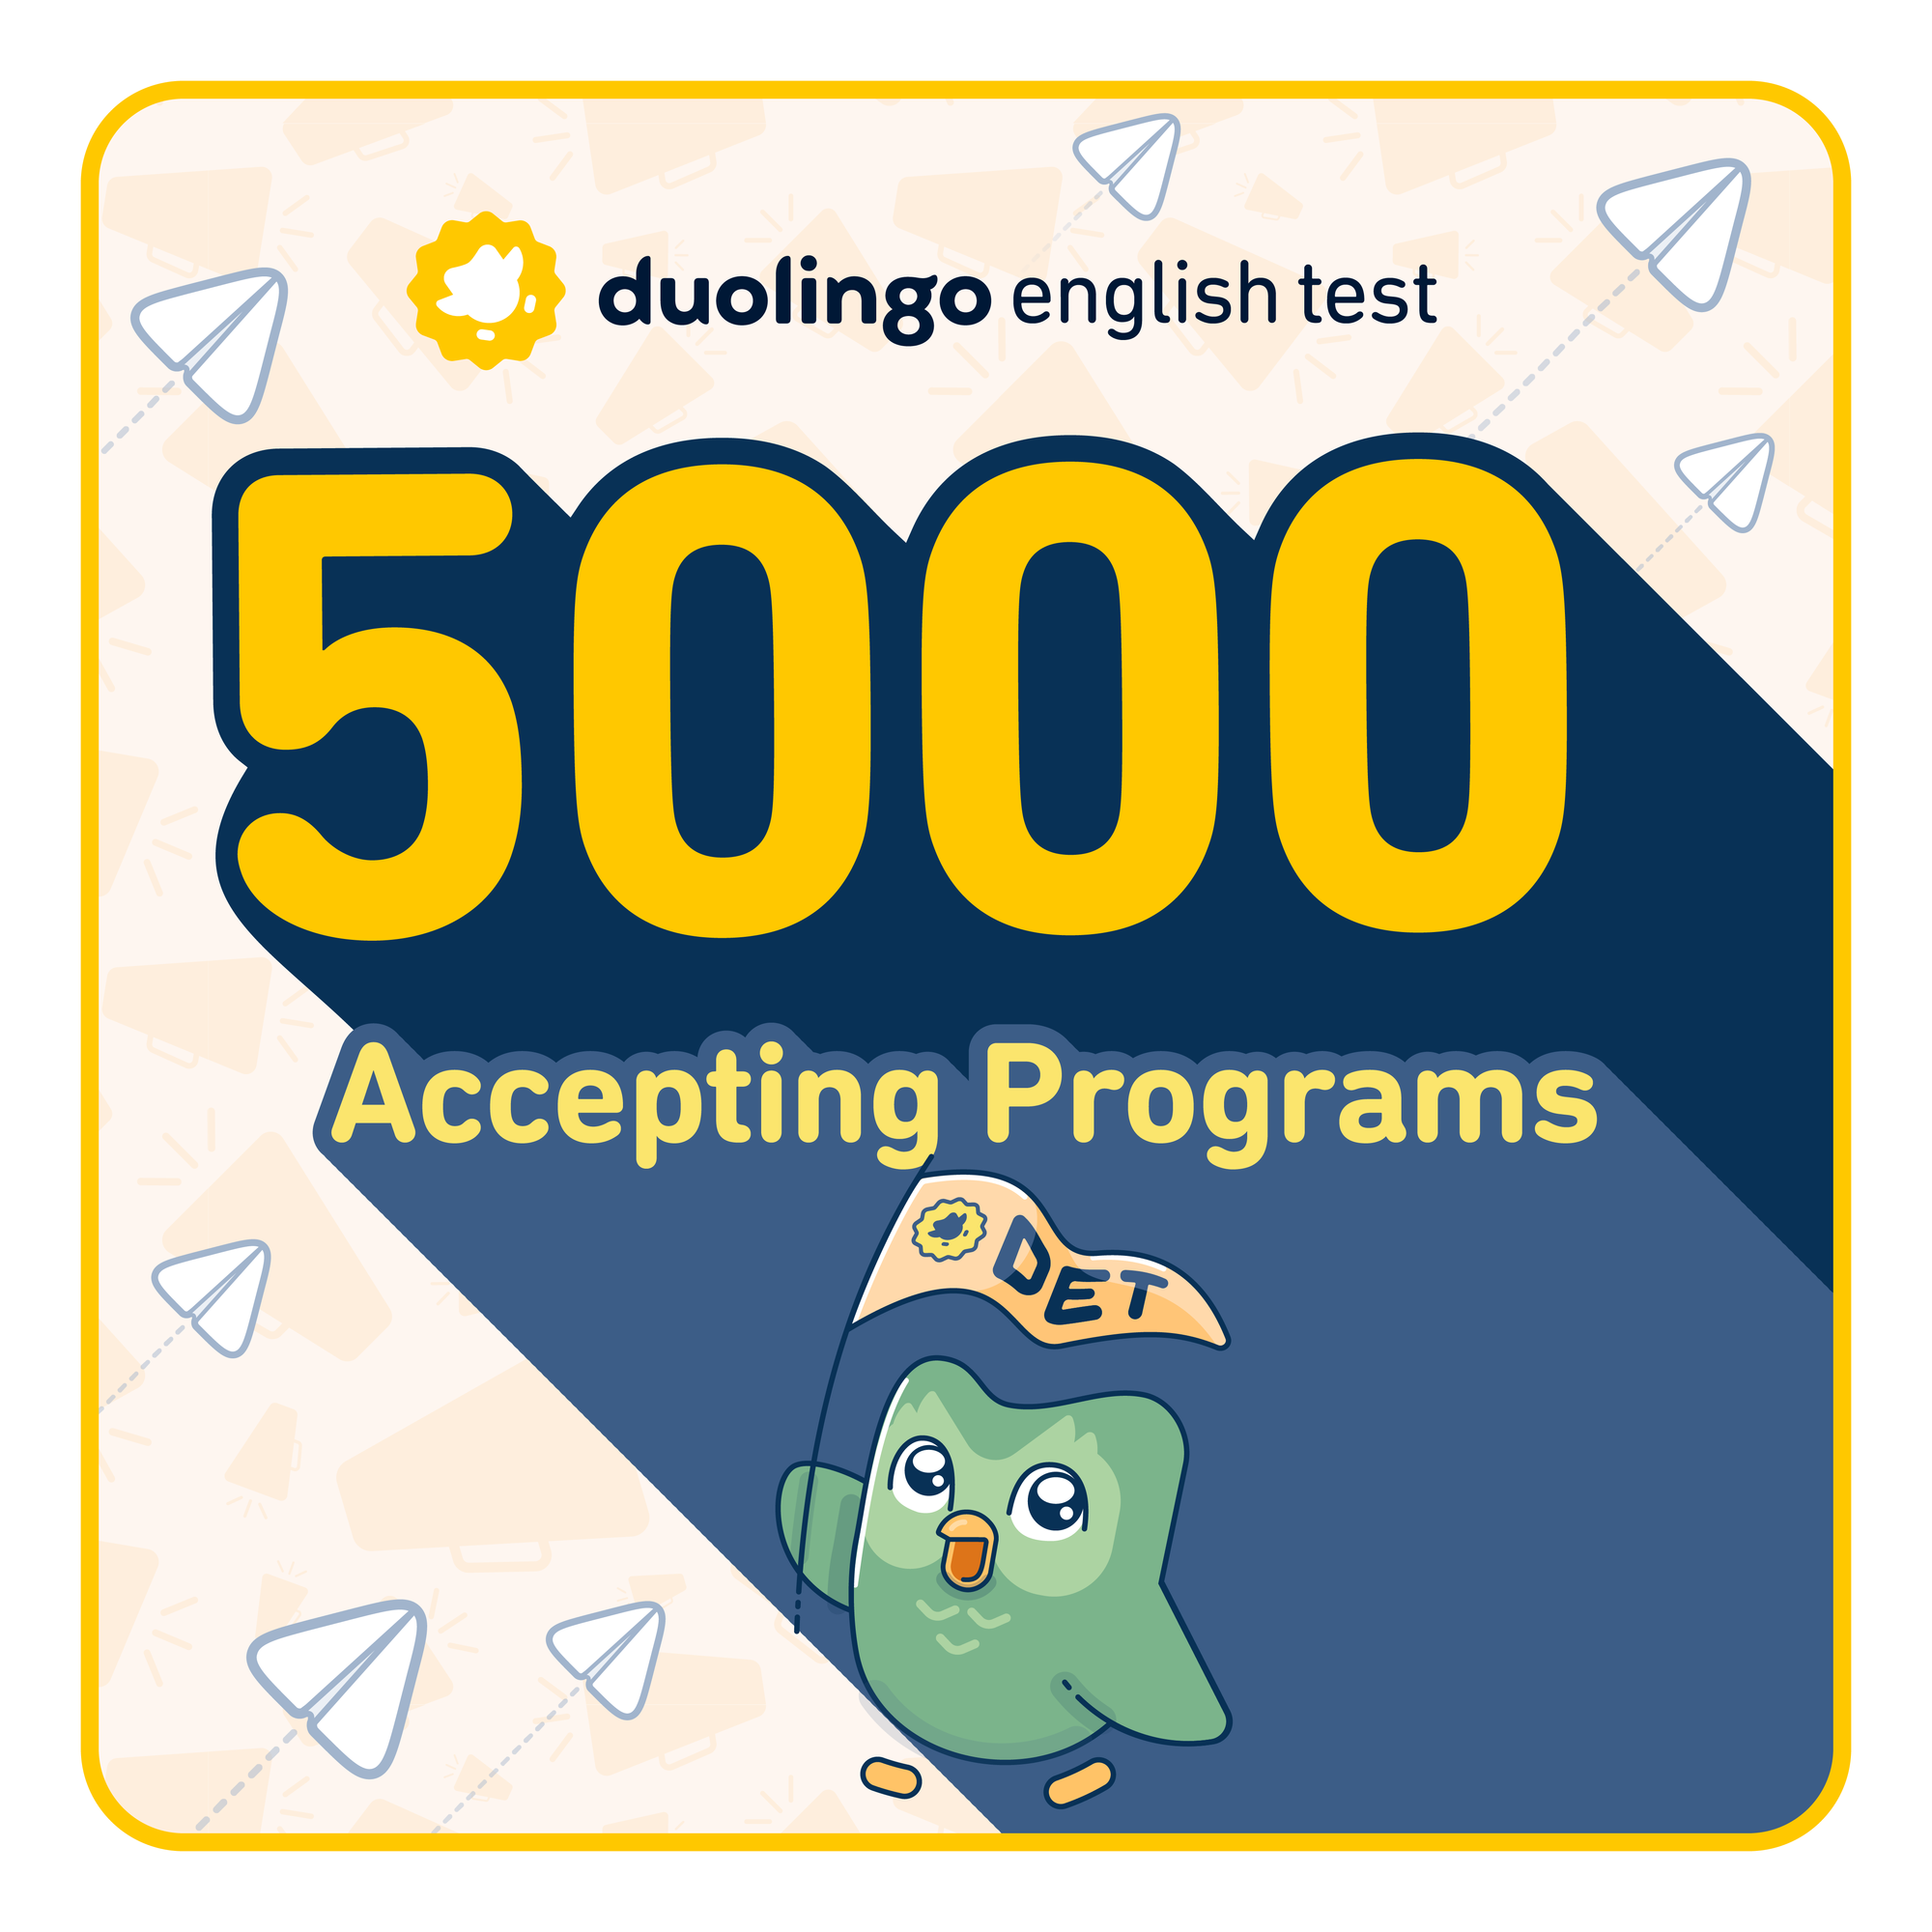 An image of Duo the Duolingo owl, holding a flag that says "DET" alongside the words "5000 accepting programs" 